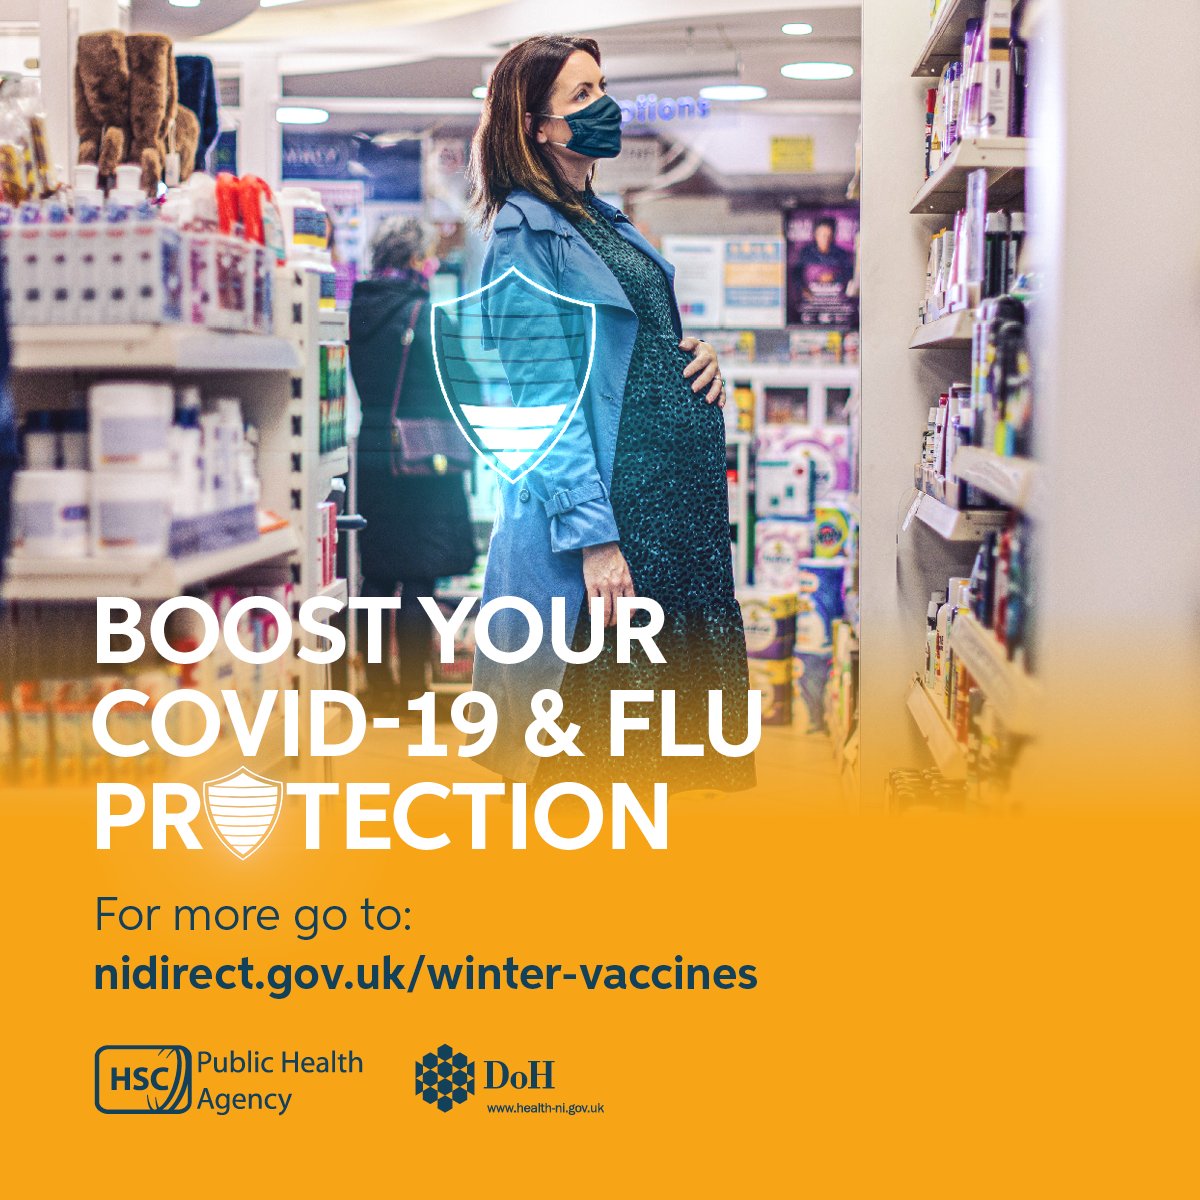 Boost your COVID-19 and flu protection with your FREE flu vaccine & COVID-19 booster, for the best protection for you and your family this winter. Find out more at: pha.site/living-well #wintervaccines